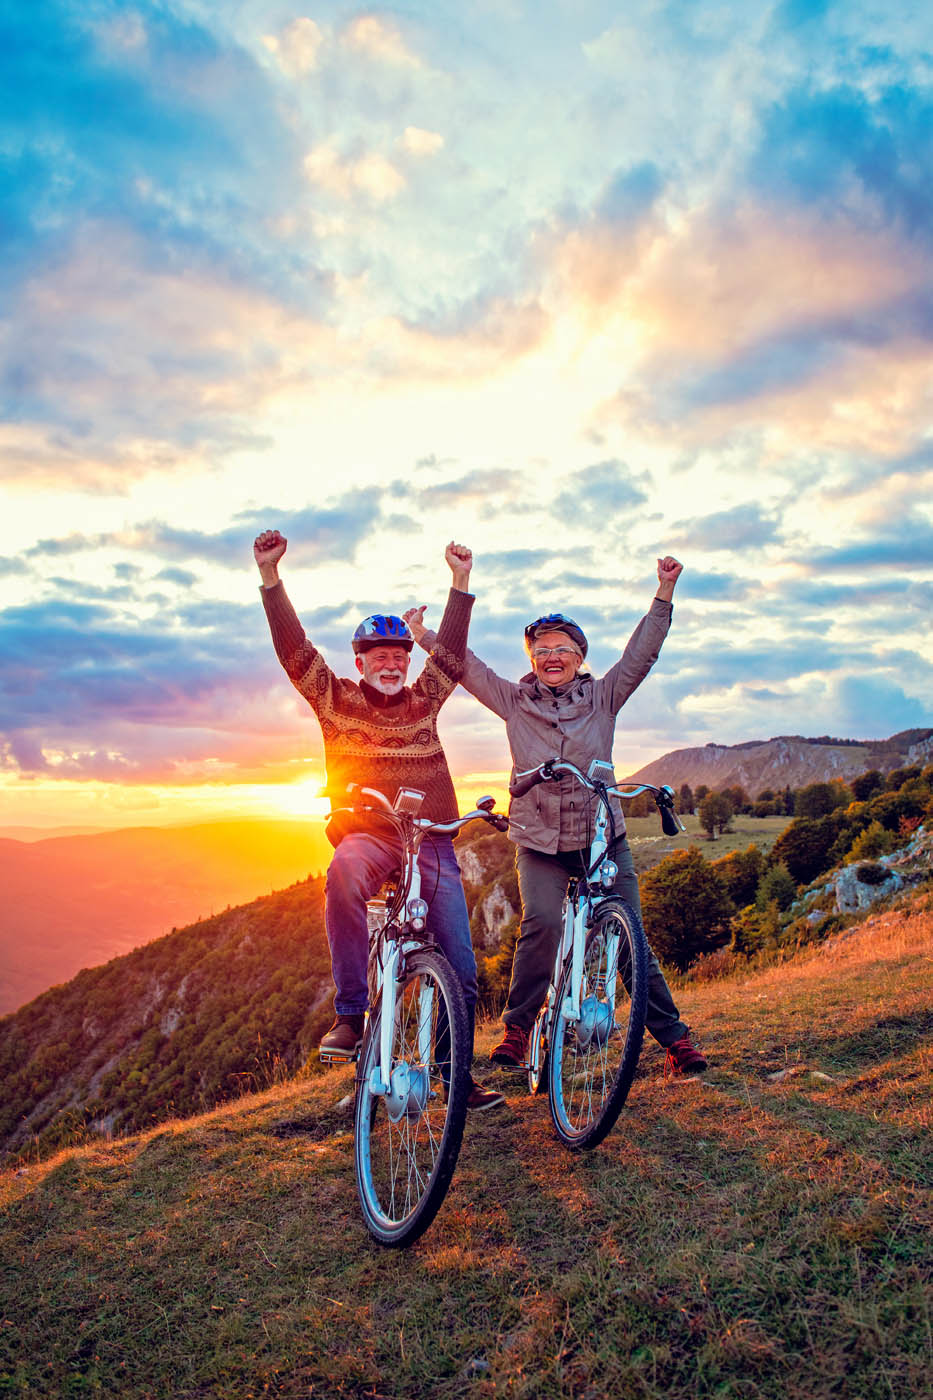 A senior couple biking pain-free into the sunset thanks to Light Lounge's knee pain treatment in Scottsdale